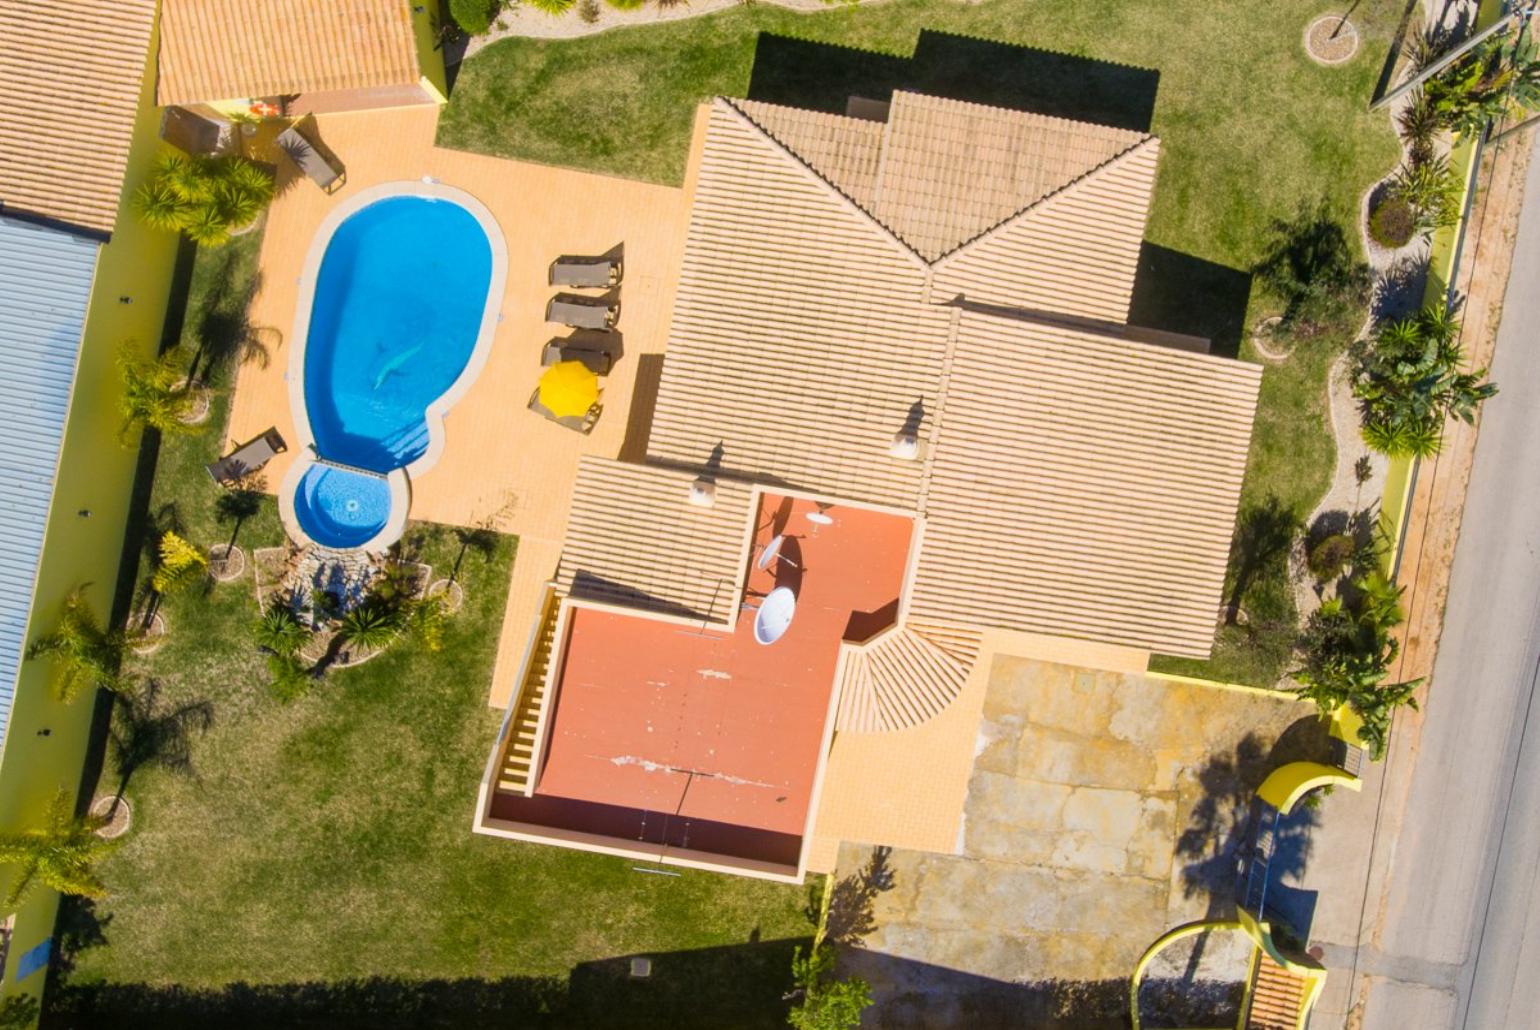 Aerial view of the villa